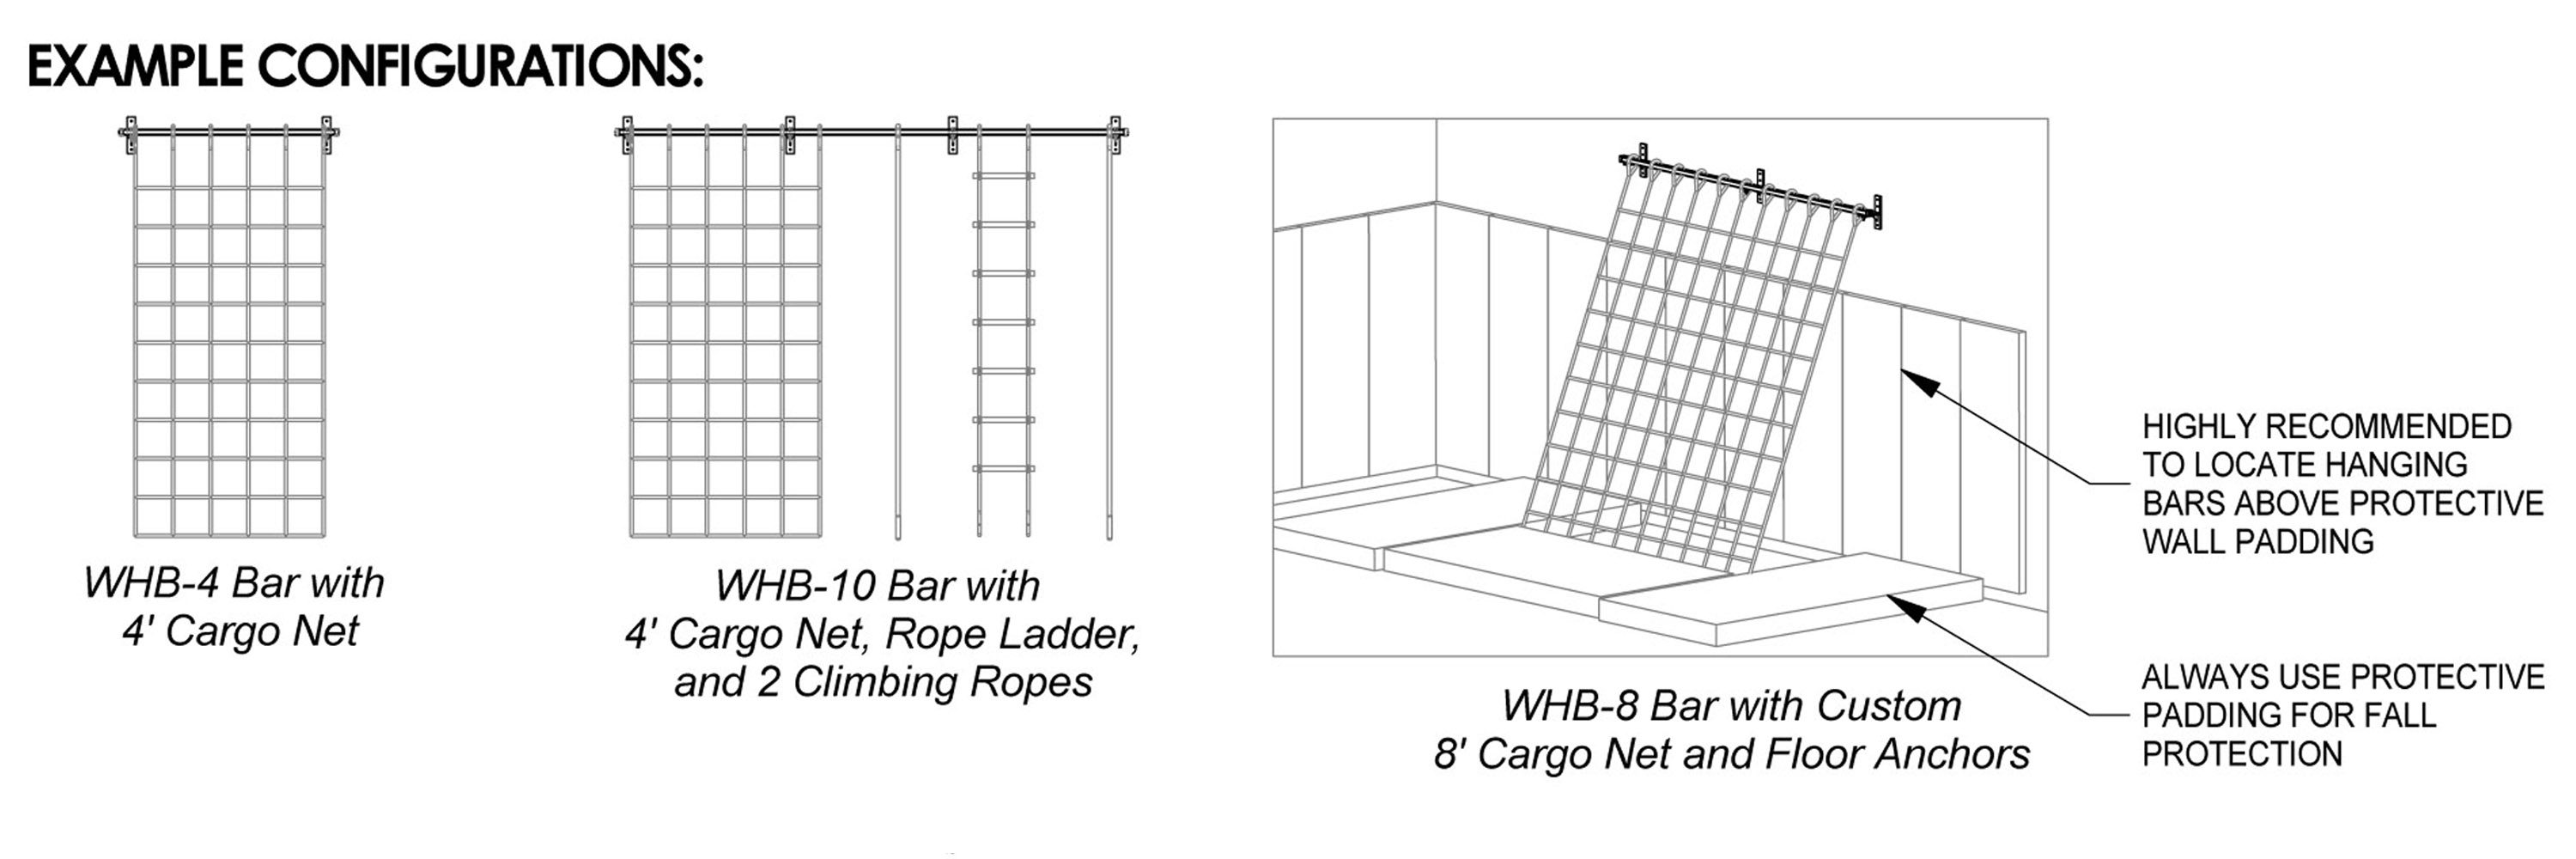 Wall Hanging Bar Product Specifications | WHB Series